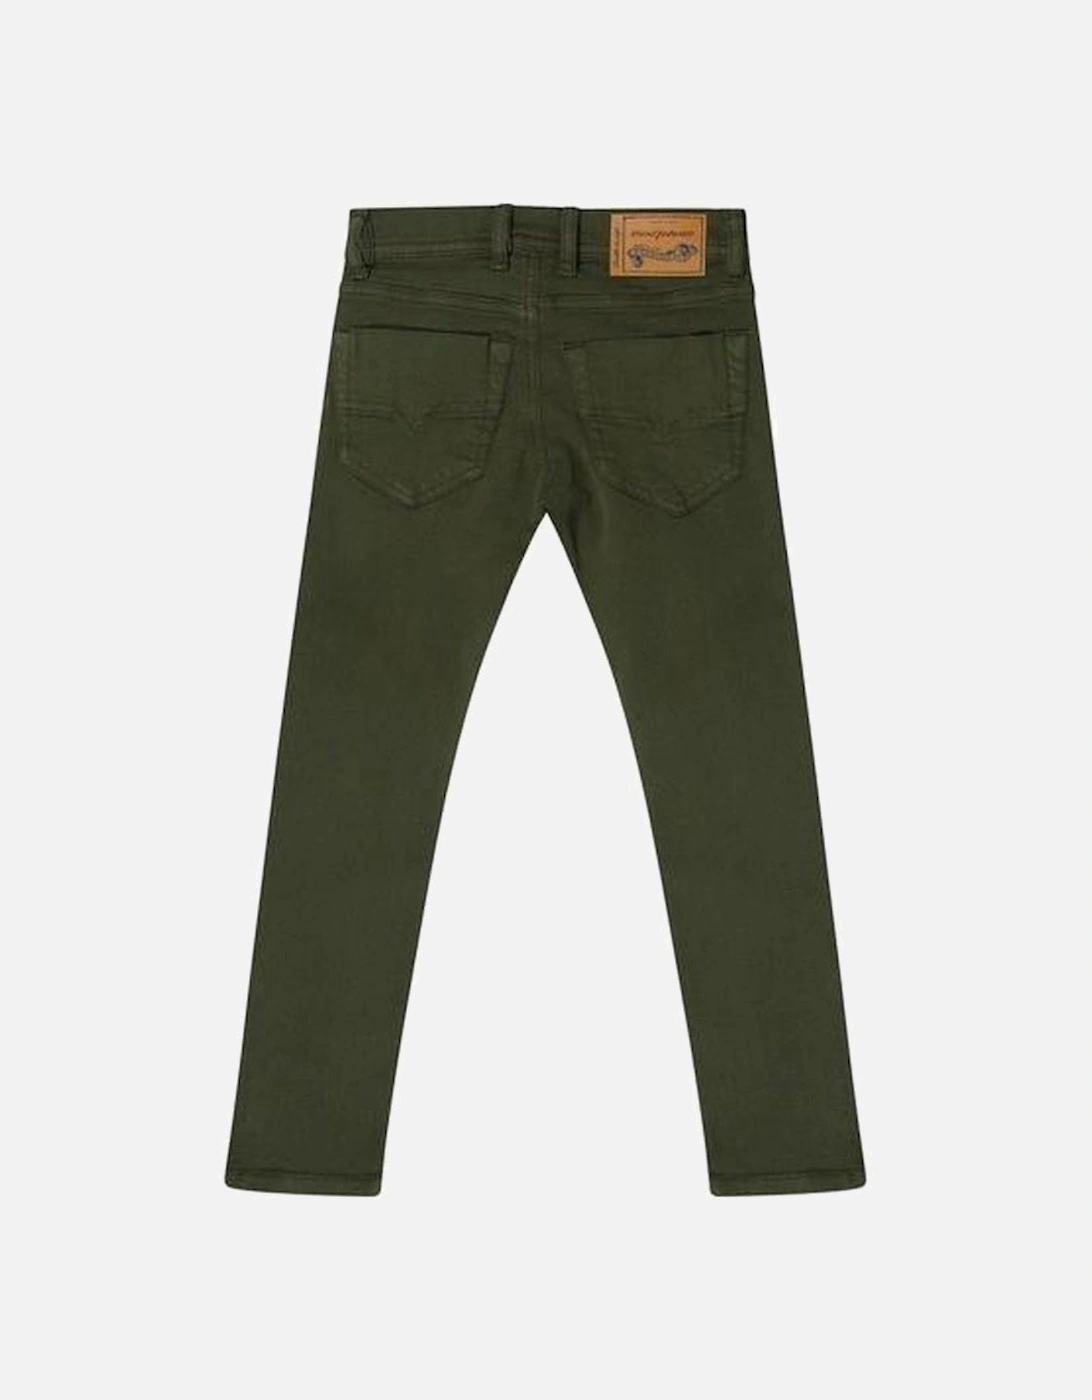 Boys Military Green Jeans